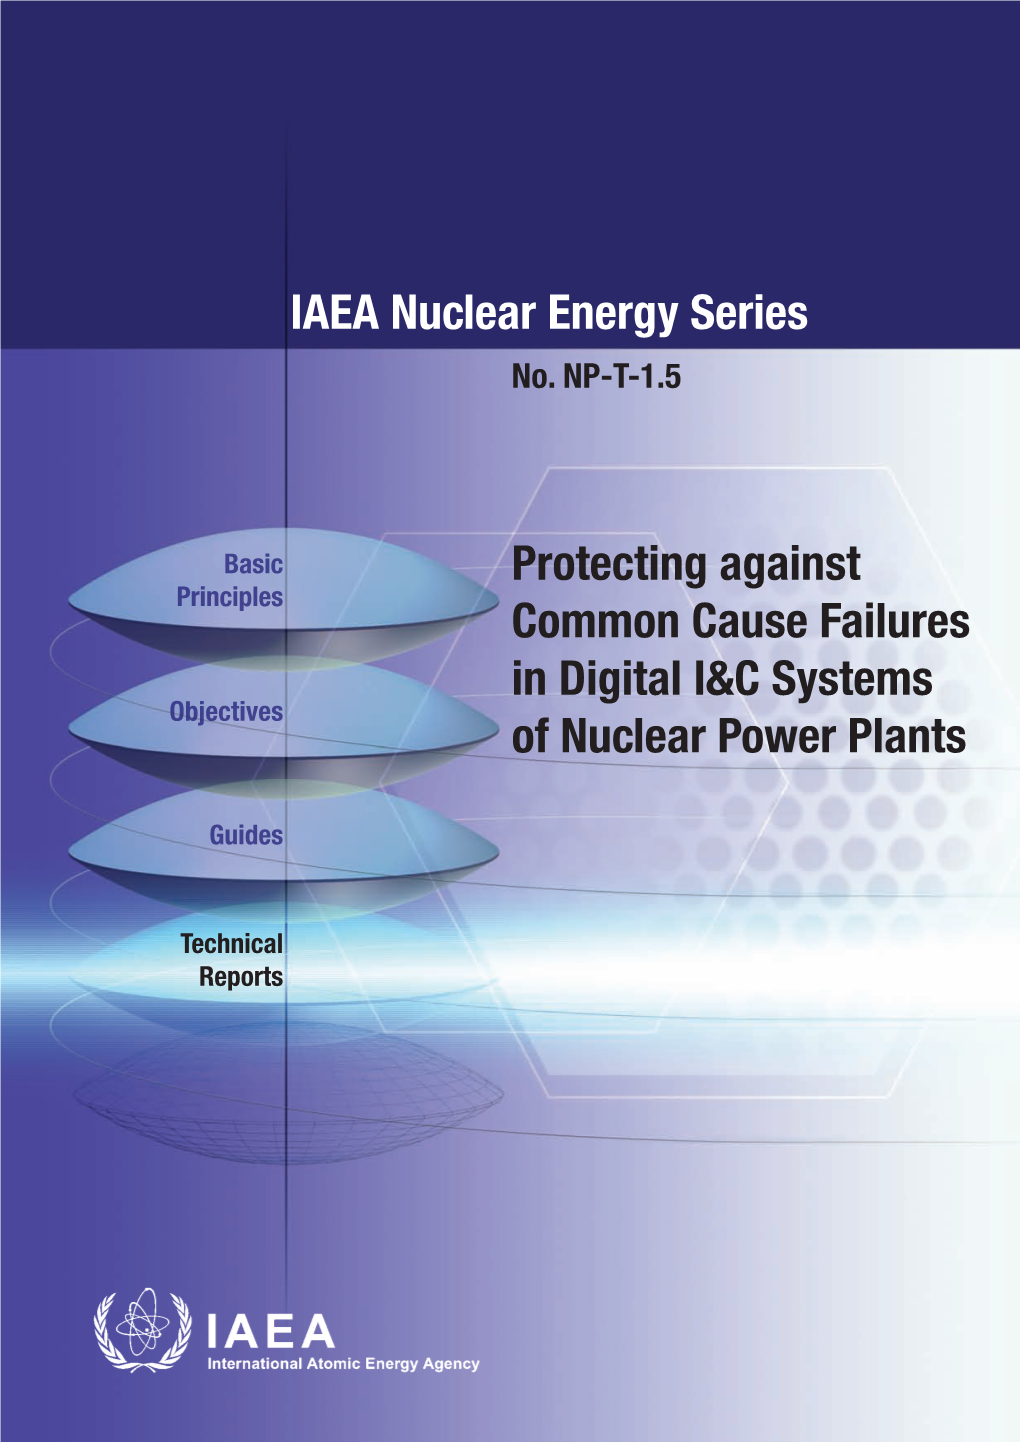 IAEA Nuclear Energy Series Protecting Against Common Cause Failures in Digital I&C Systems of Nuclear Power Plants